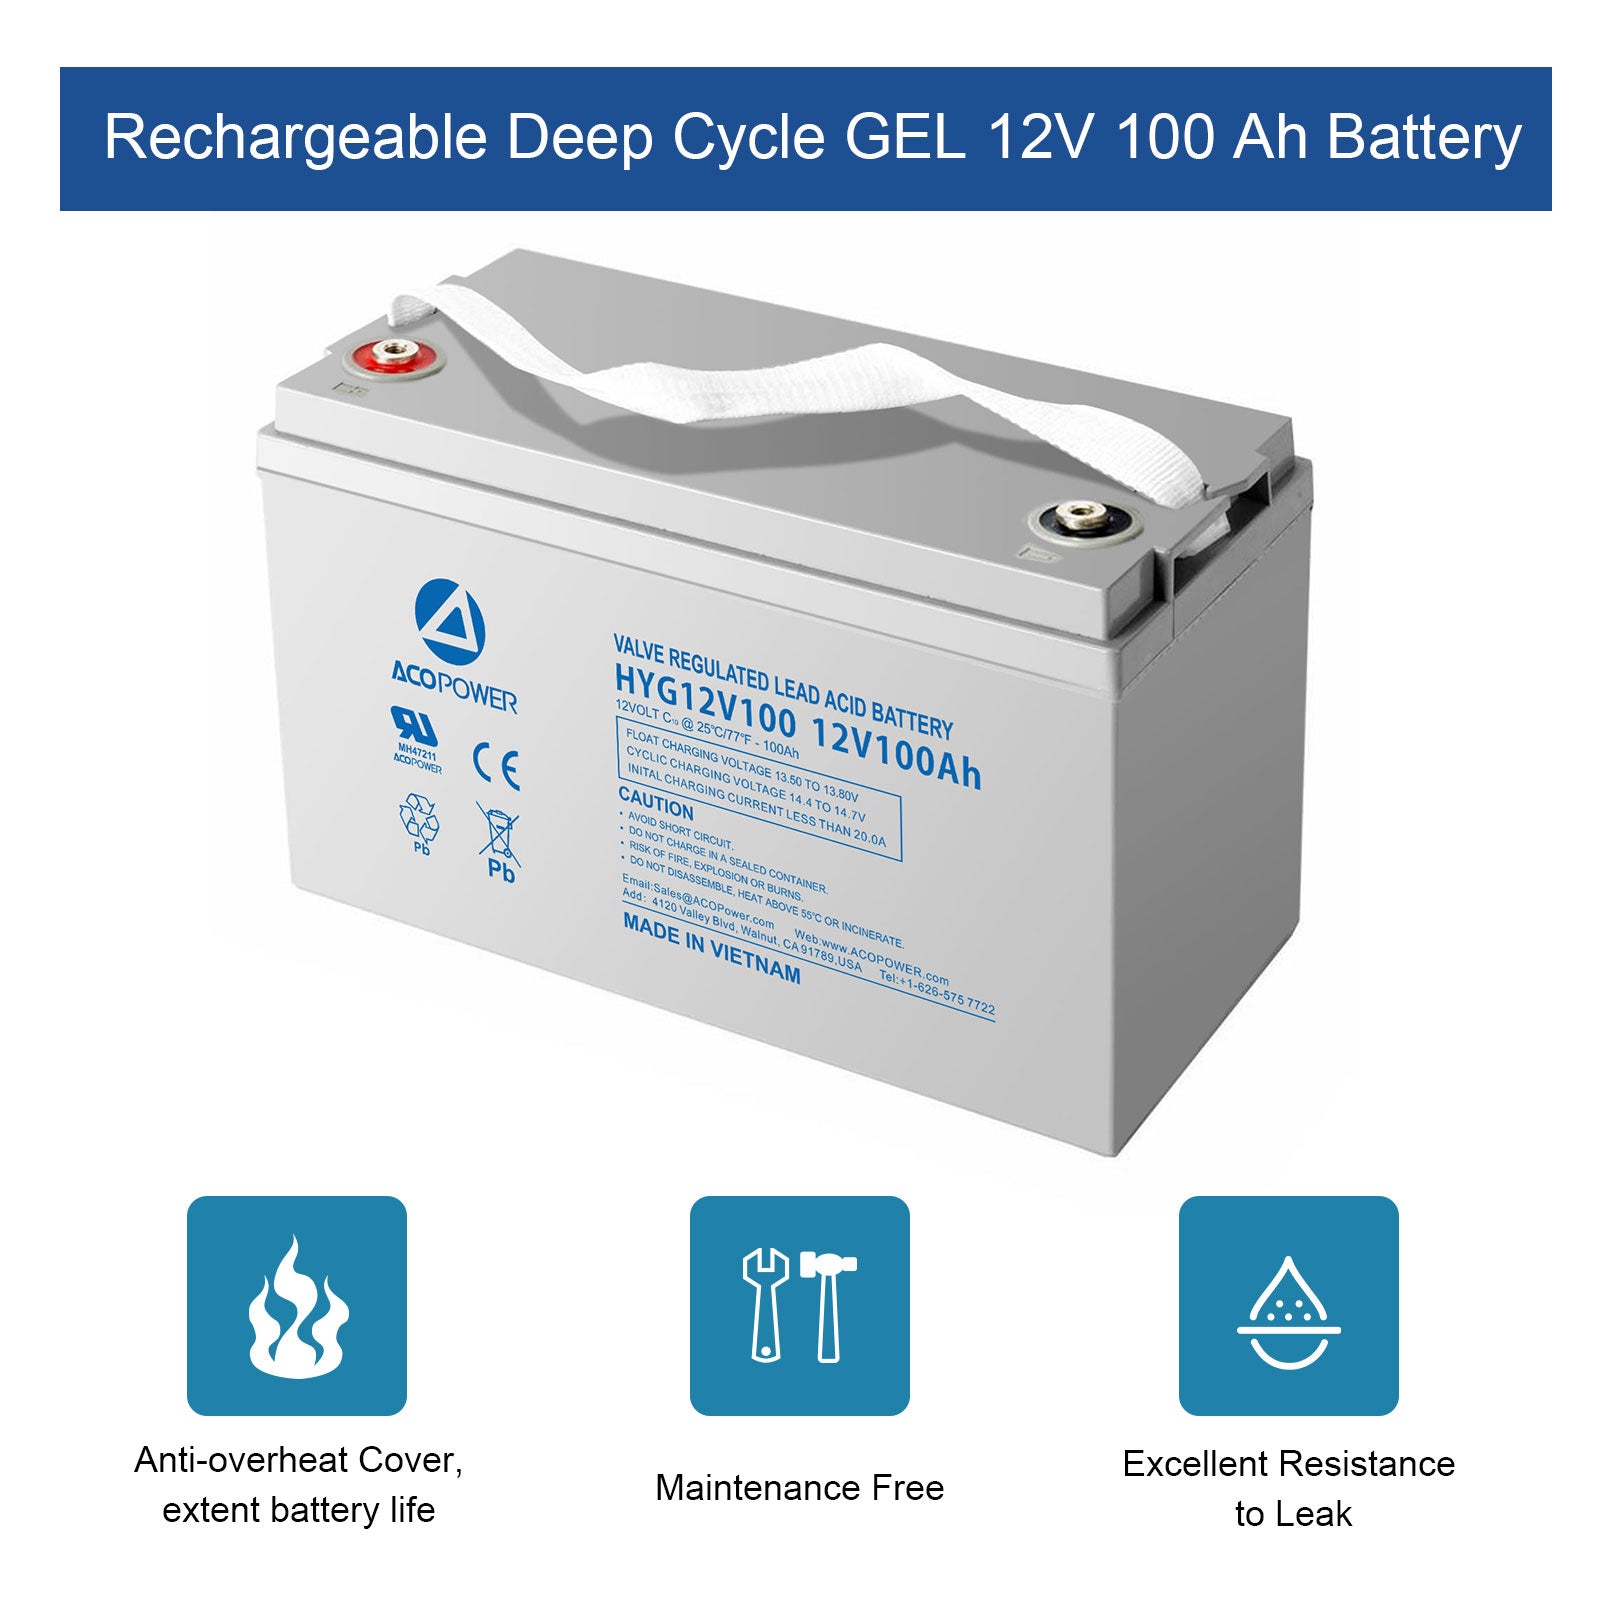 12-100Ah Rechargeable Gel Deep Cycle 12V 100 Battery Button –